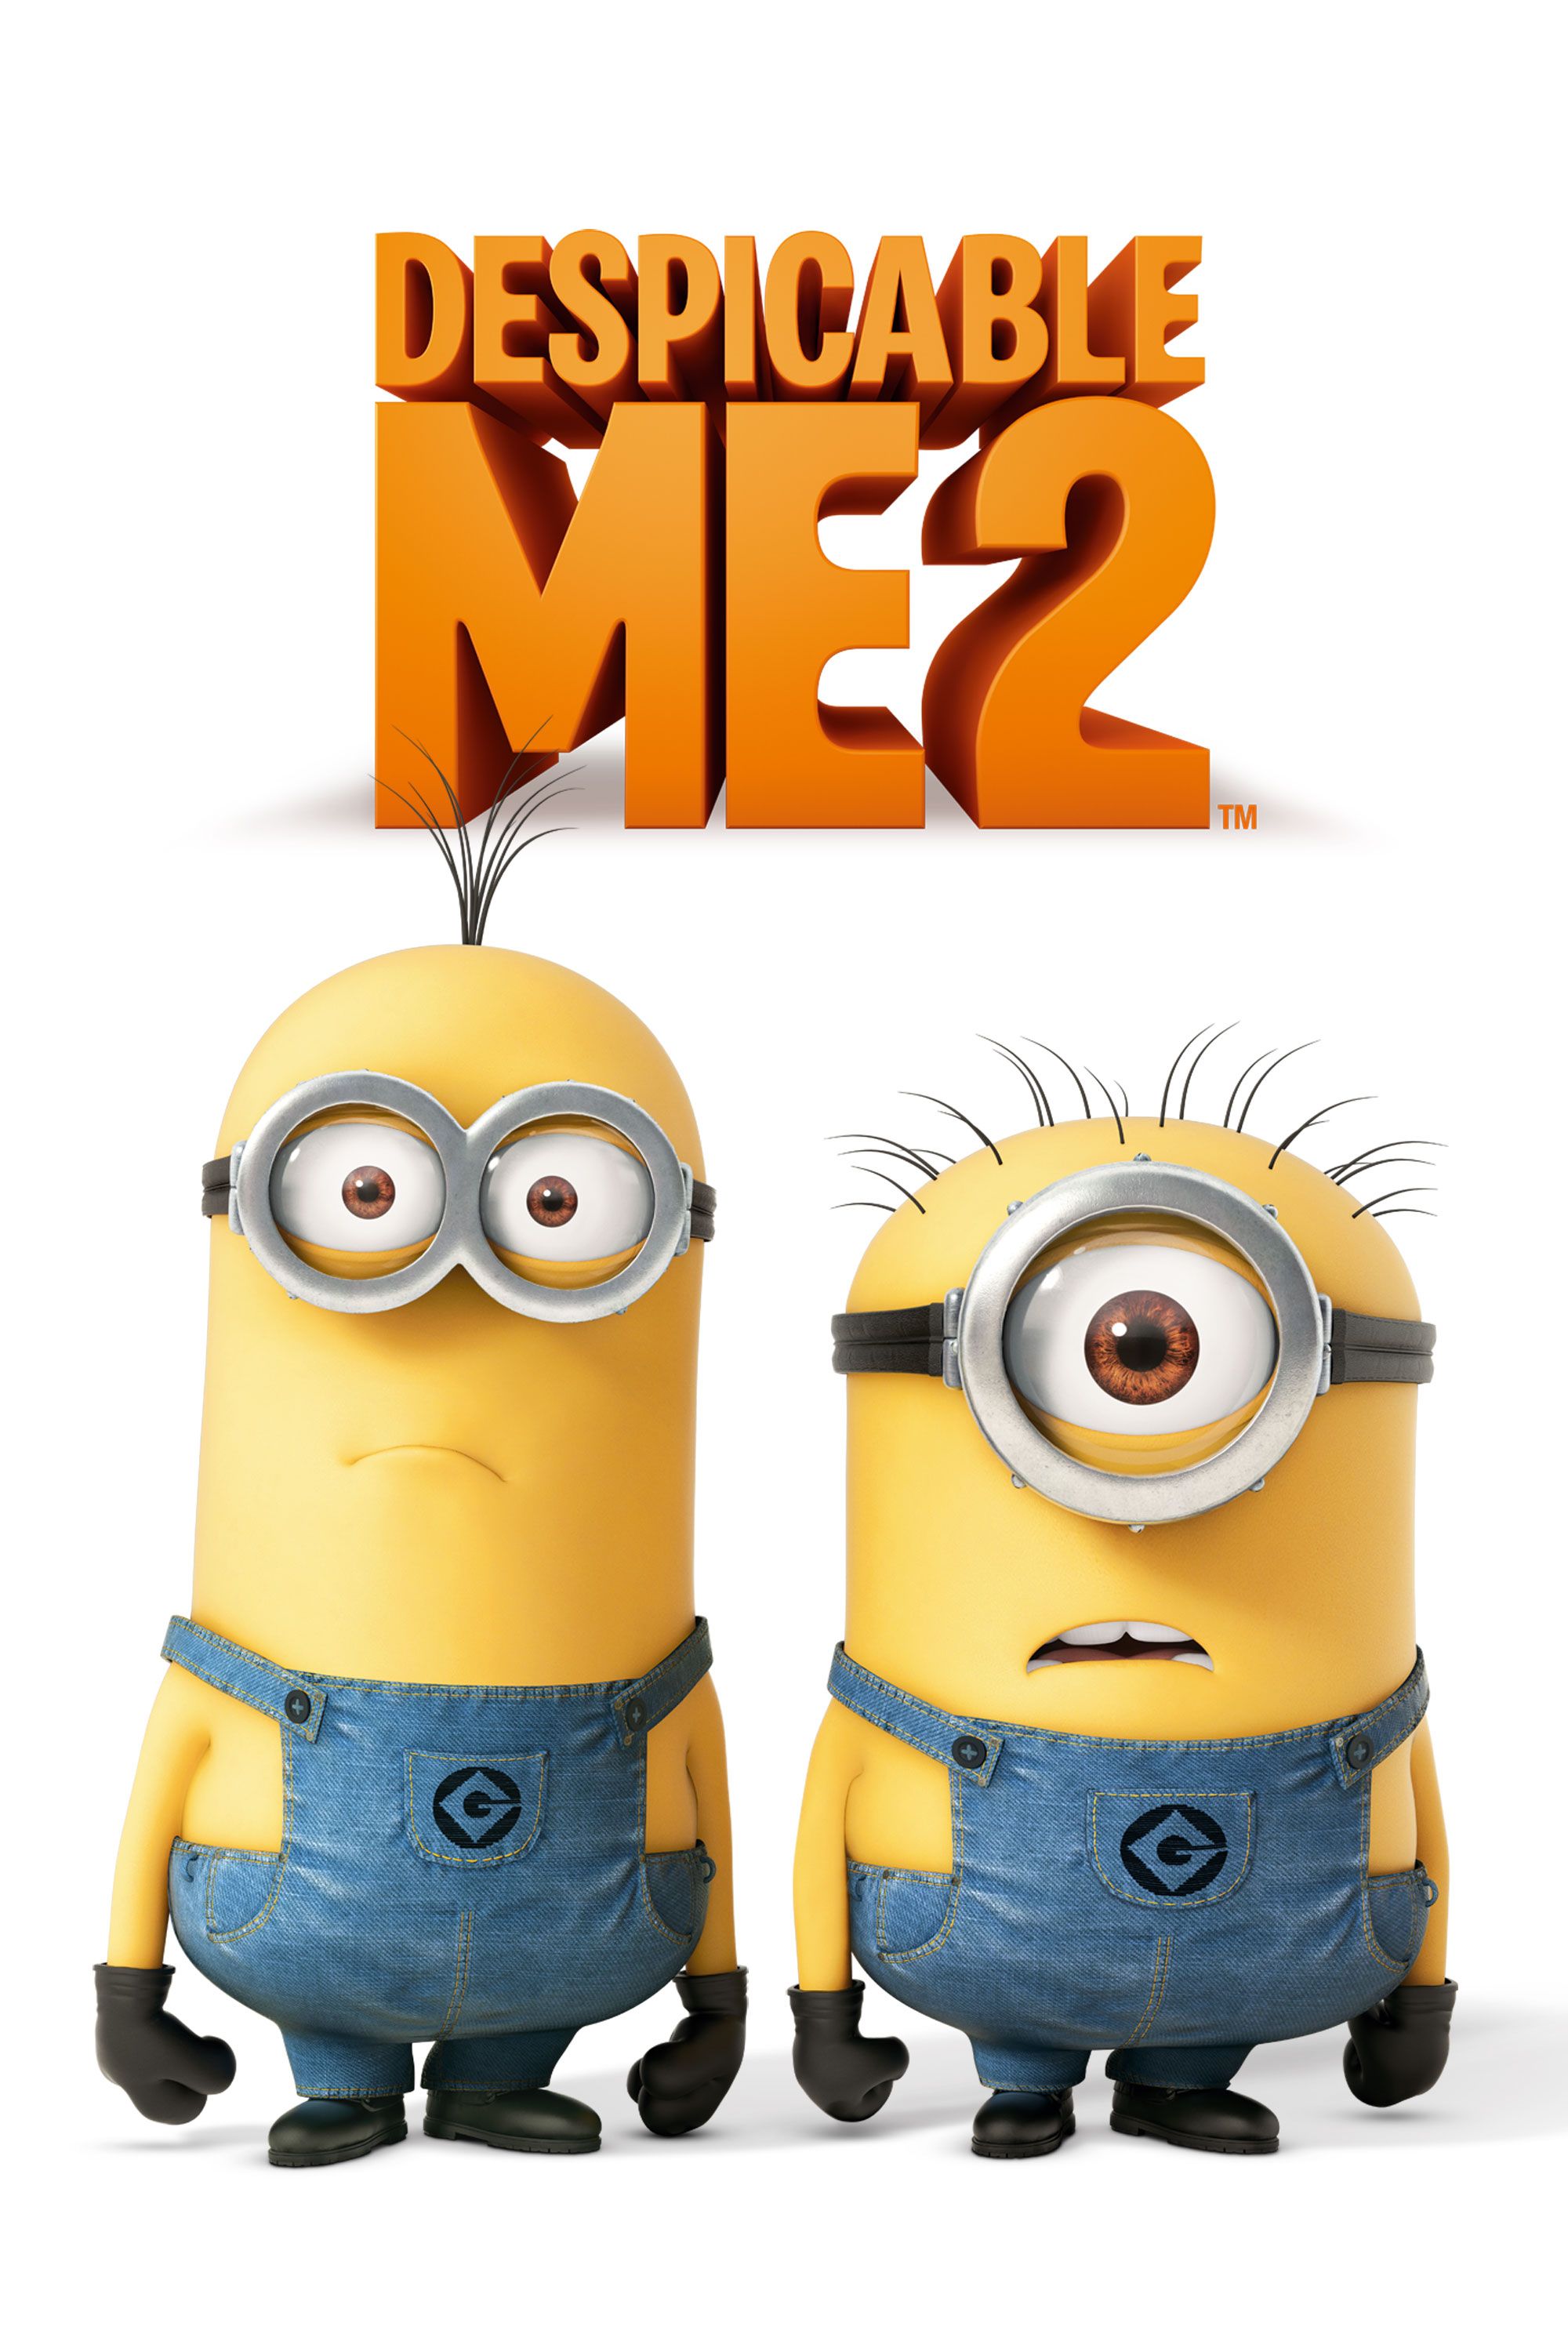 Despicable me movie free download c# net books free download pdf